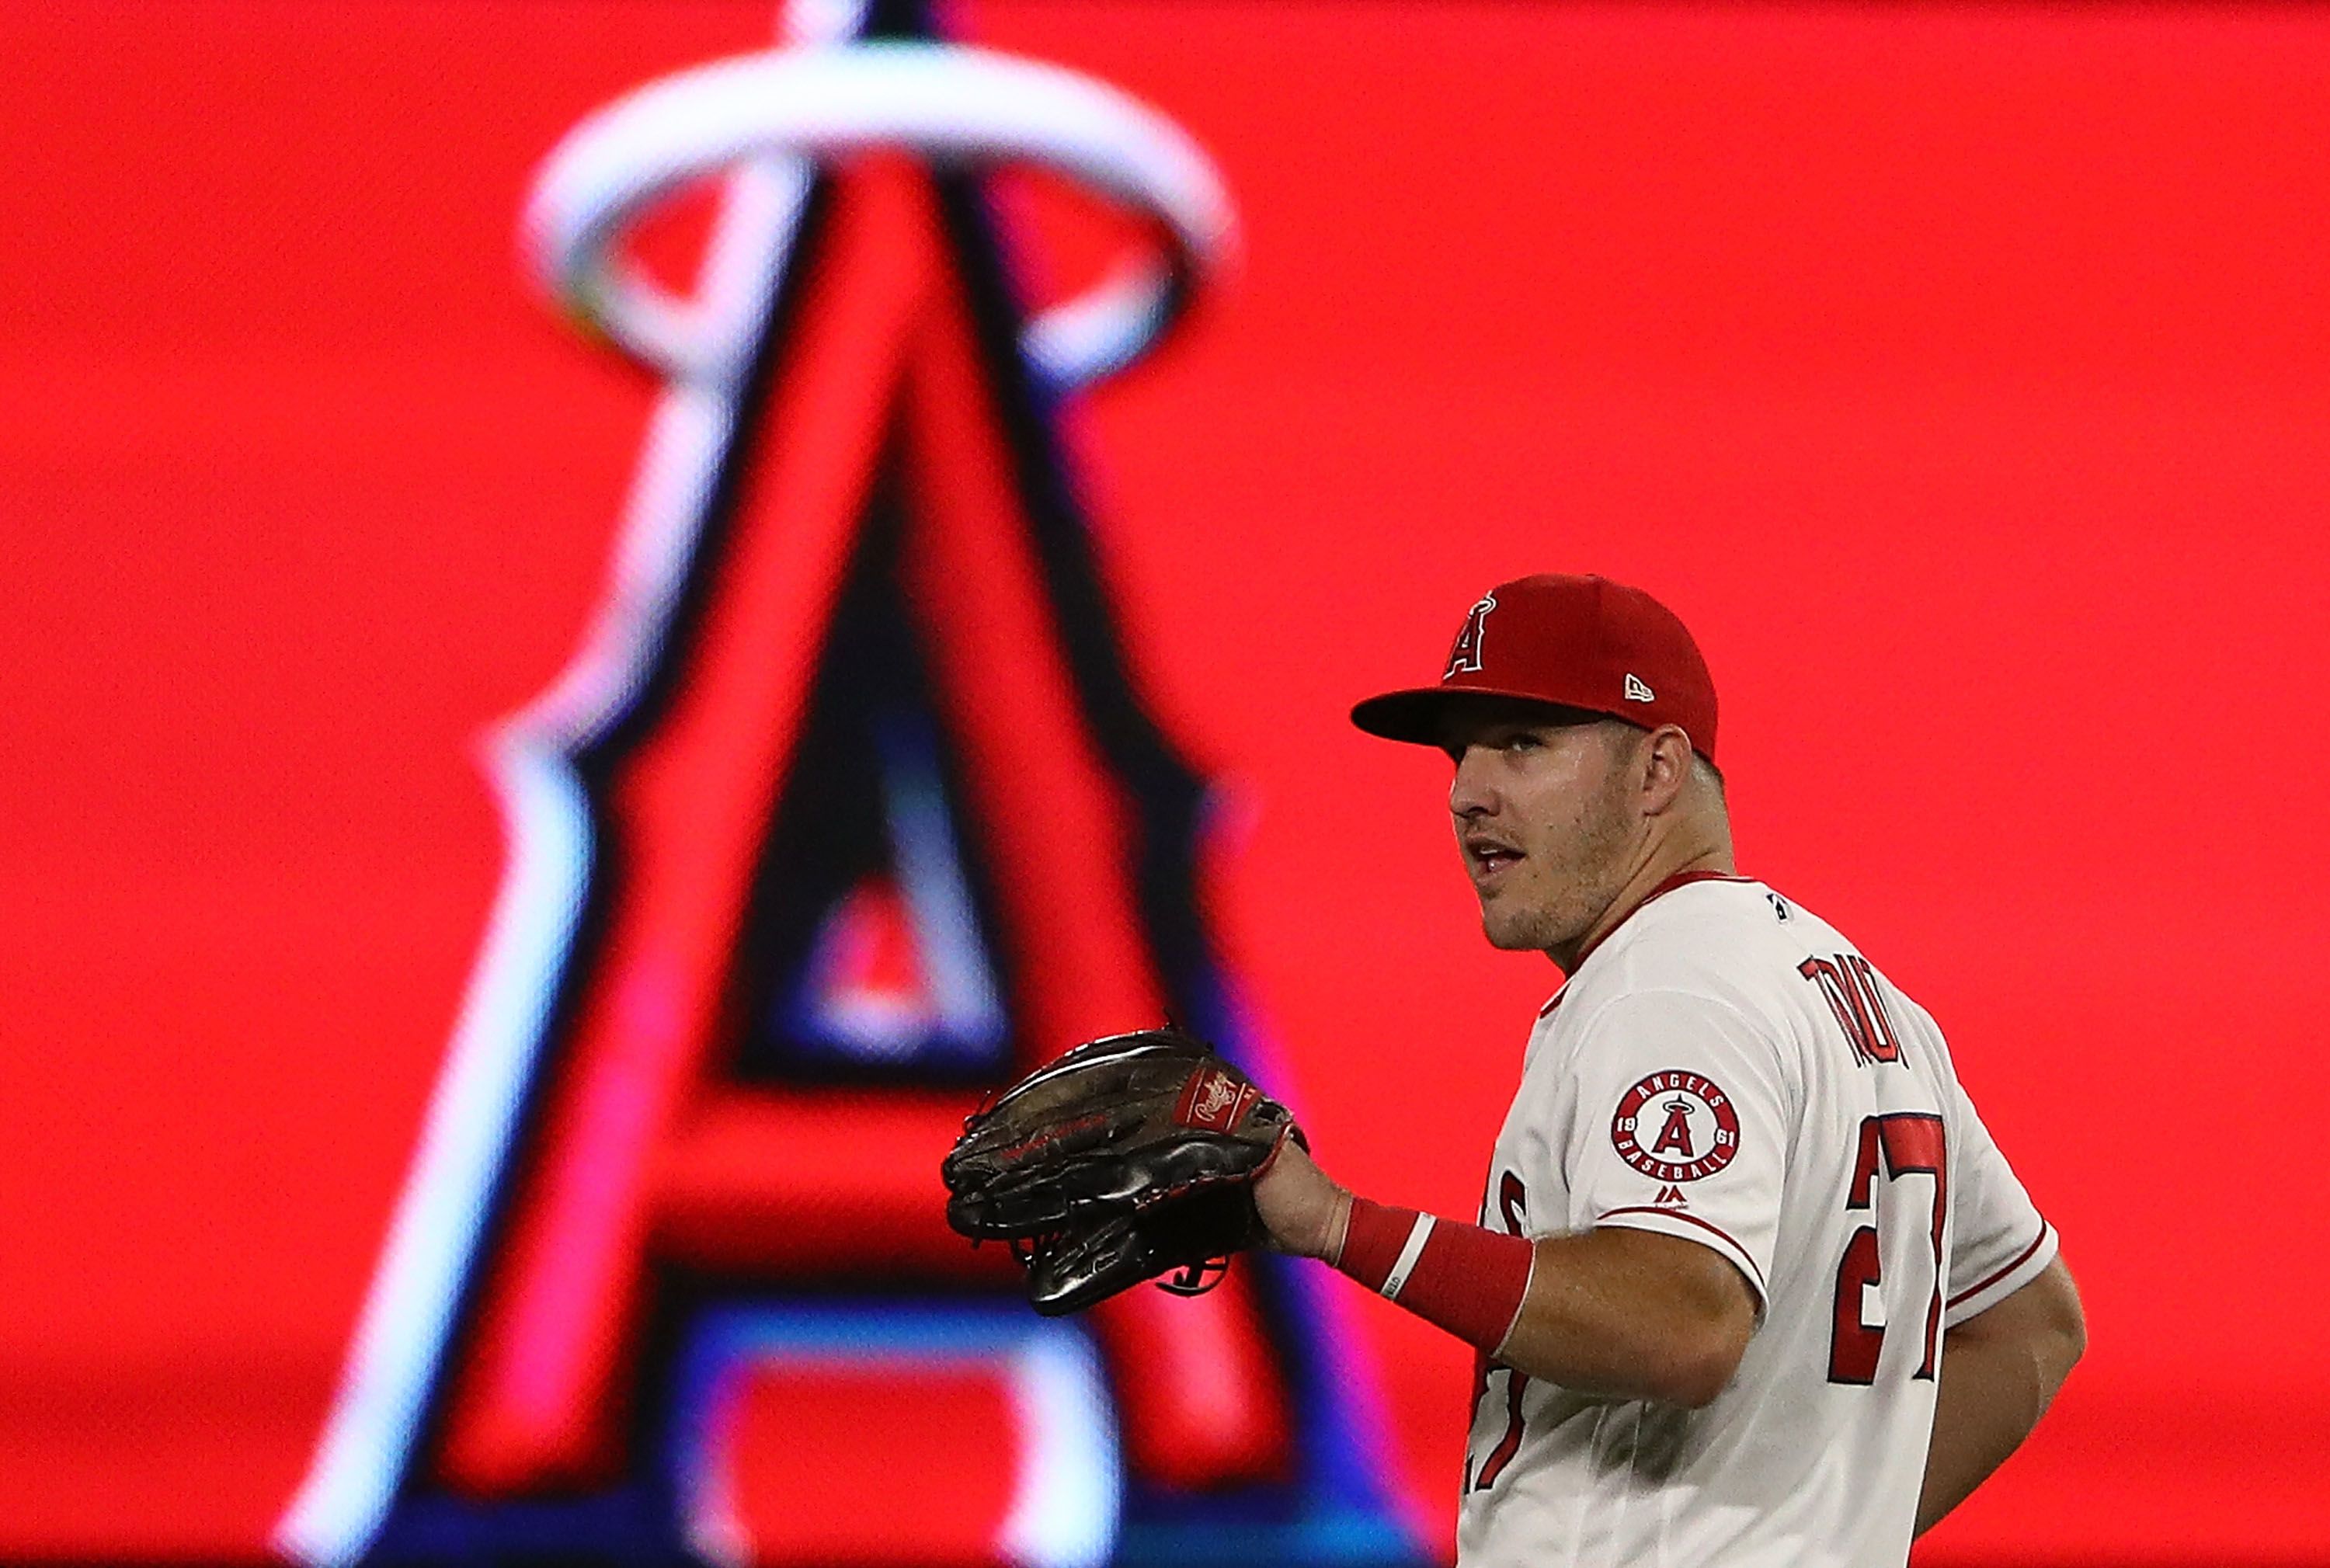 Los Angeles Angels - OFFICIAL: Mike Trout agrees to terms on a 12-year  contract.